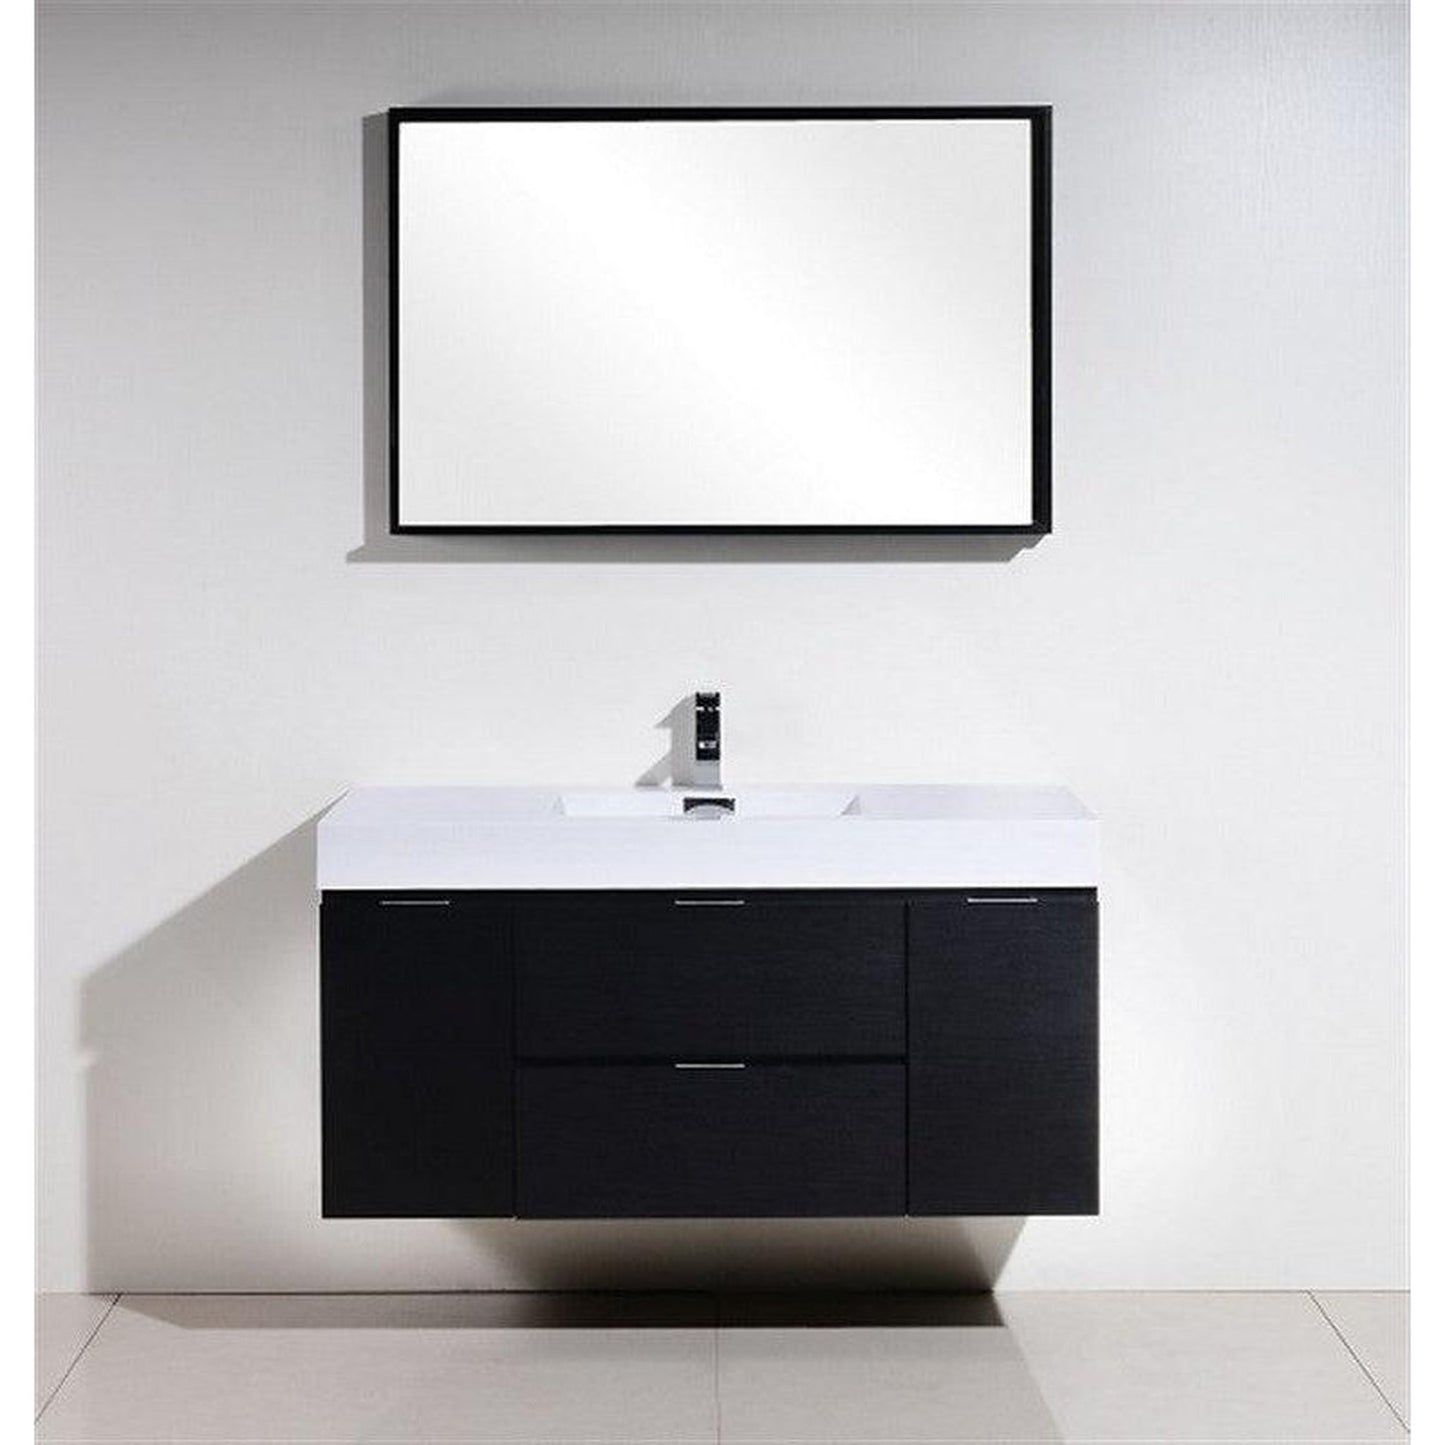 KubeBath Bliss 48" Black Wood Wall-Mounted Modern Bathroom Vanity With Single Integrated Acrylic Sink With Overflow and 44" Black Framed Mirror With Shelf